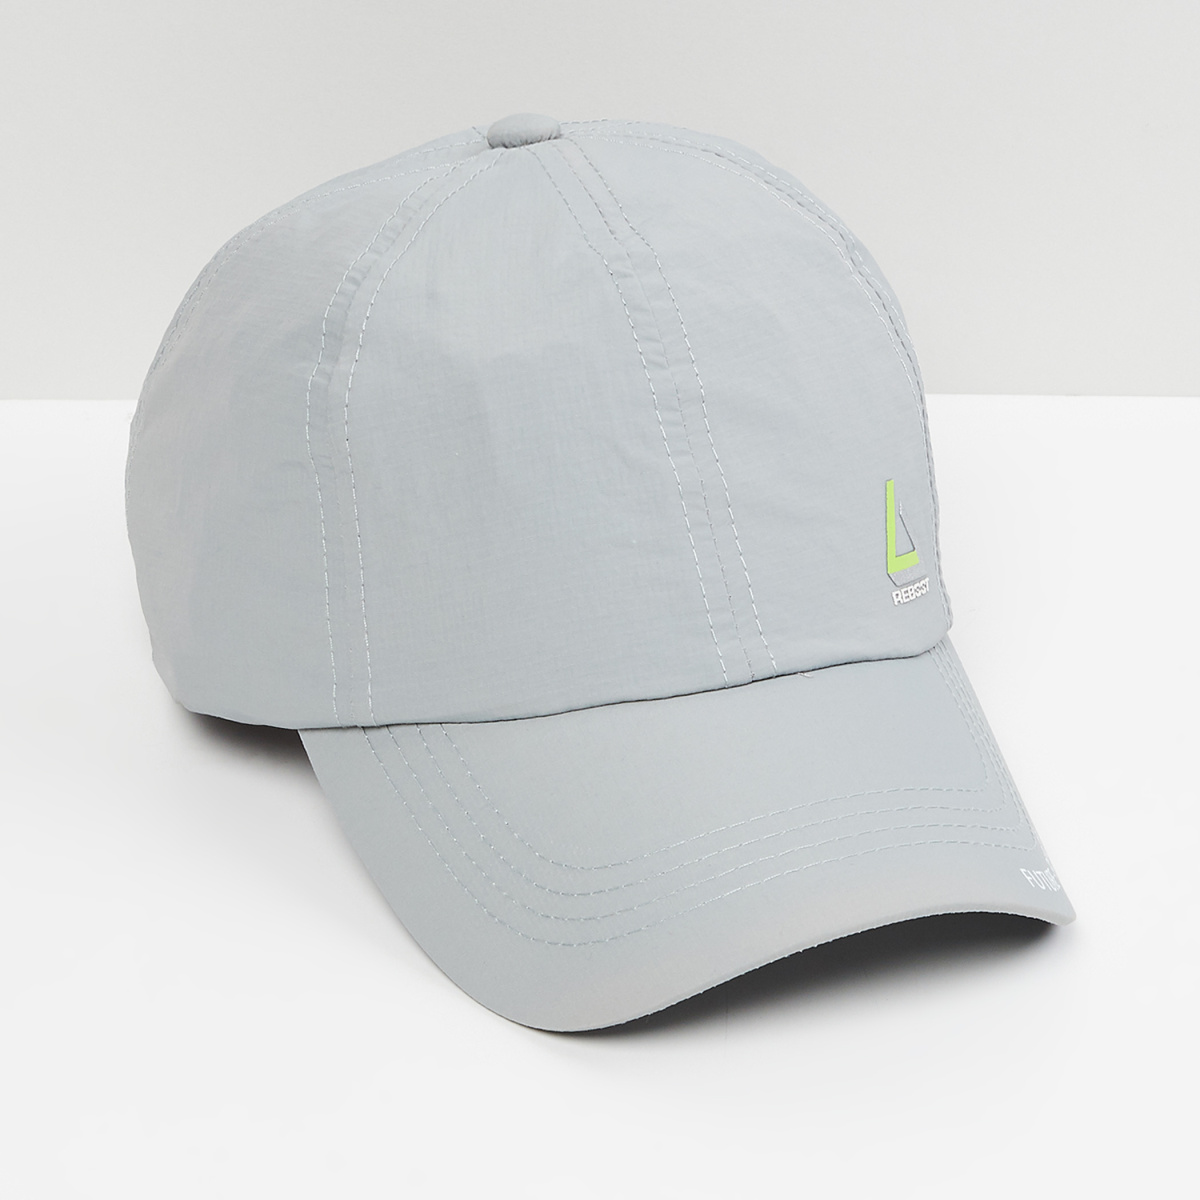 MAX Printed Cap with Adjustable Strap